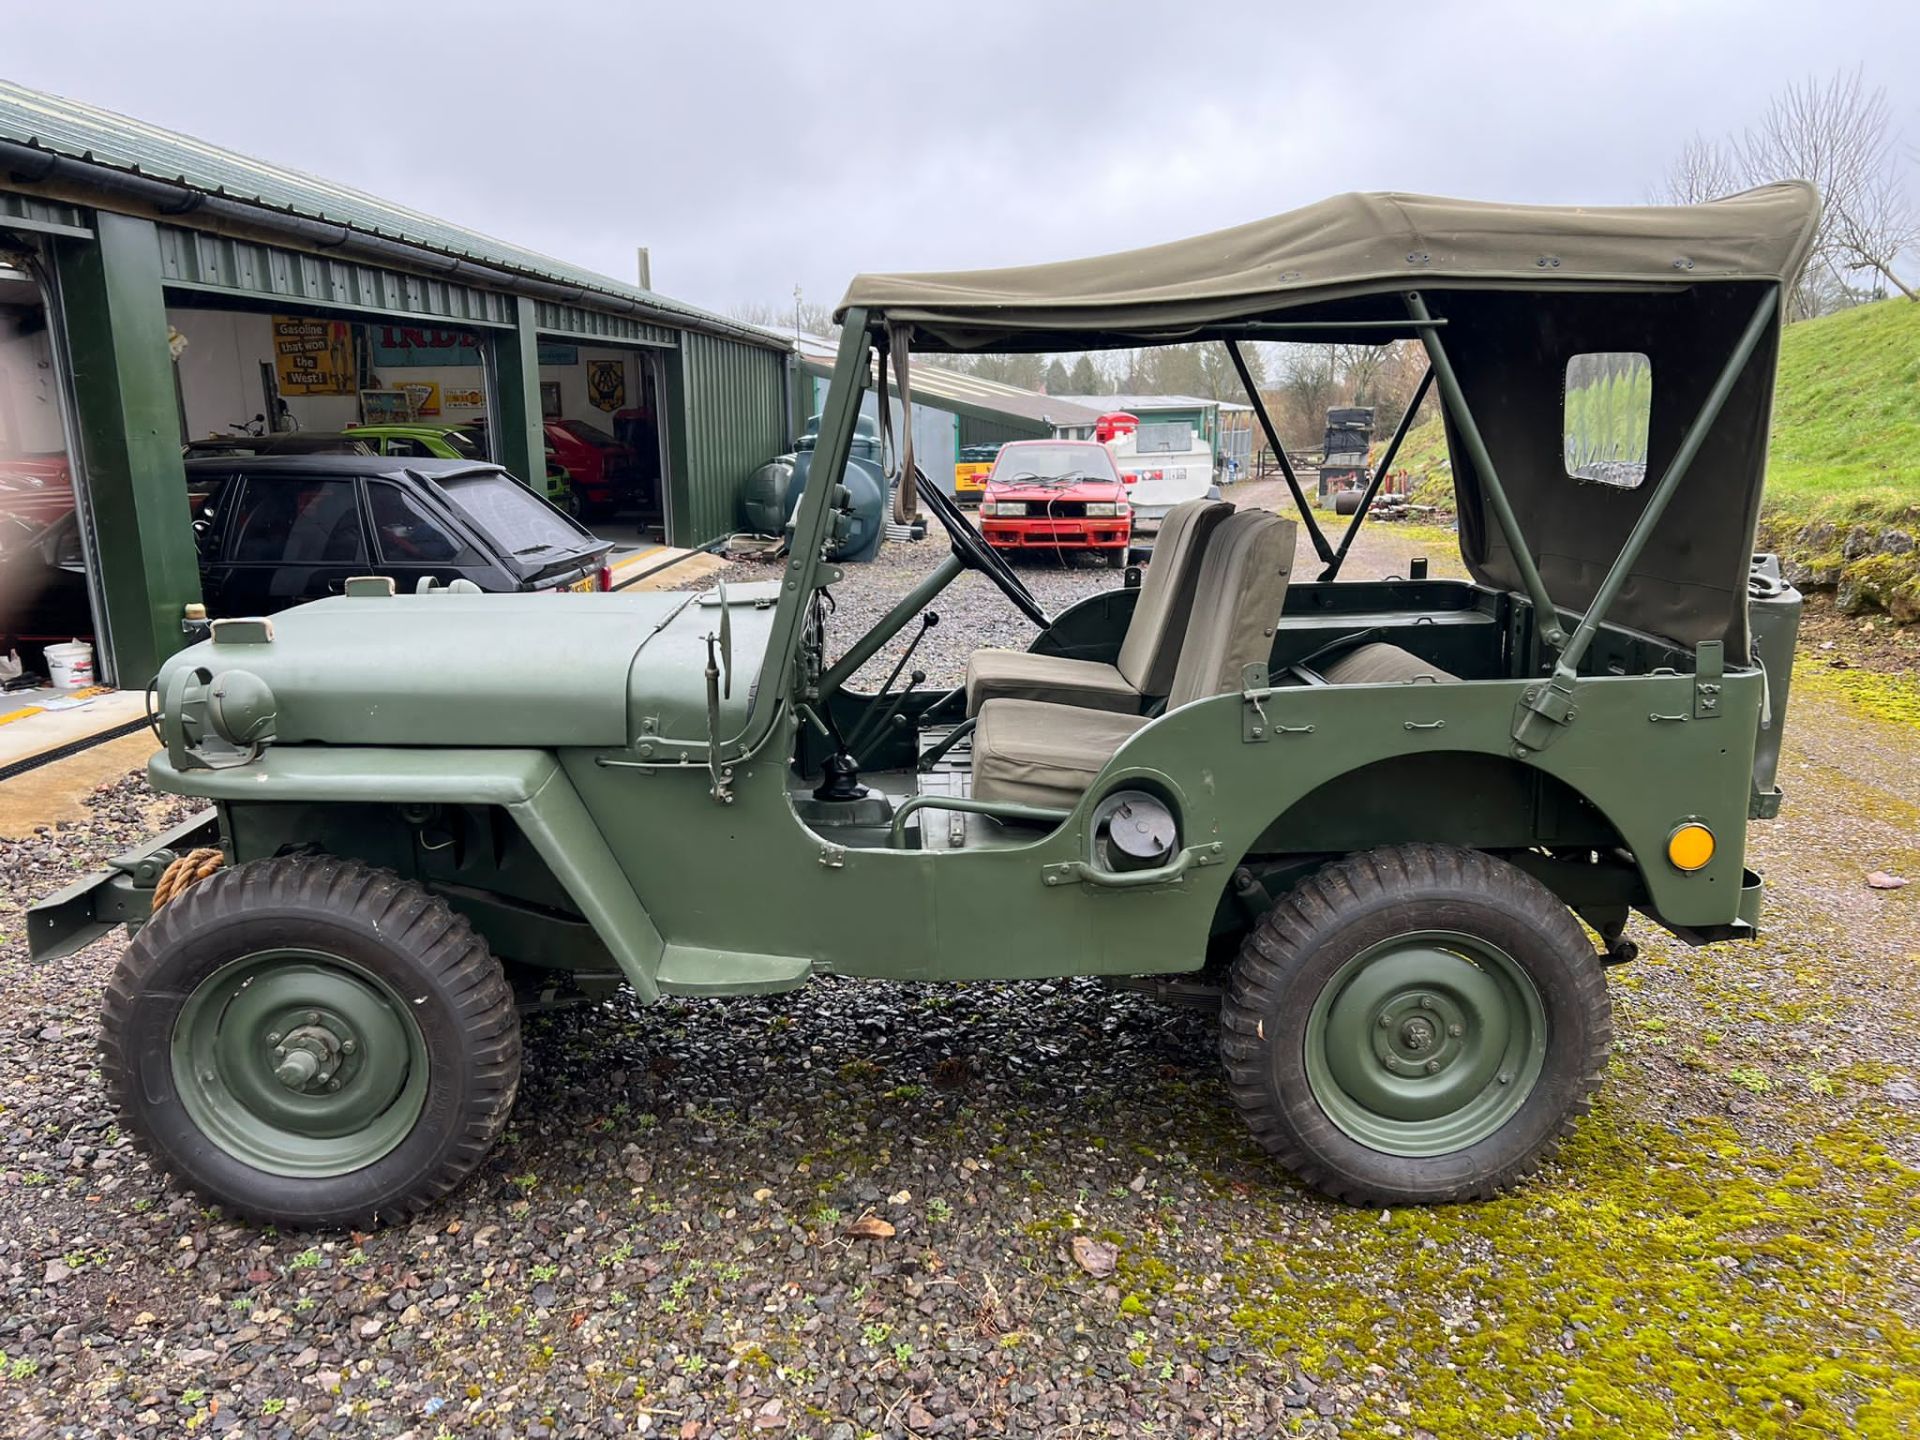 Willys Jeep Model M38 c1947 - Image 6 of 13